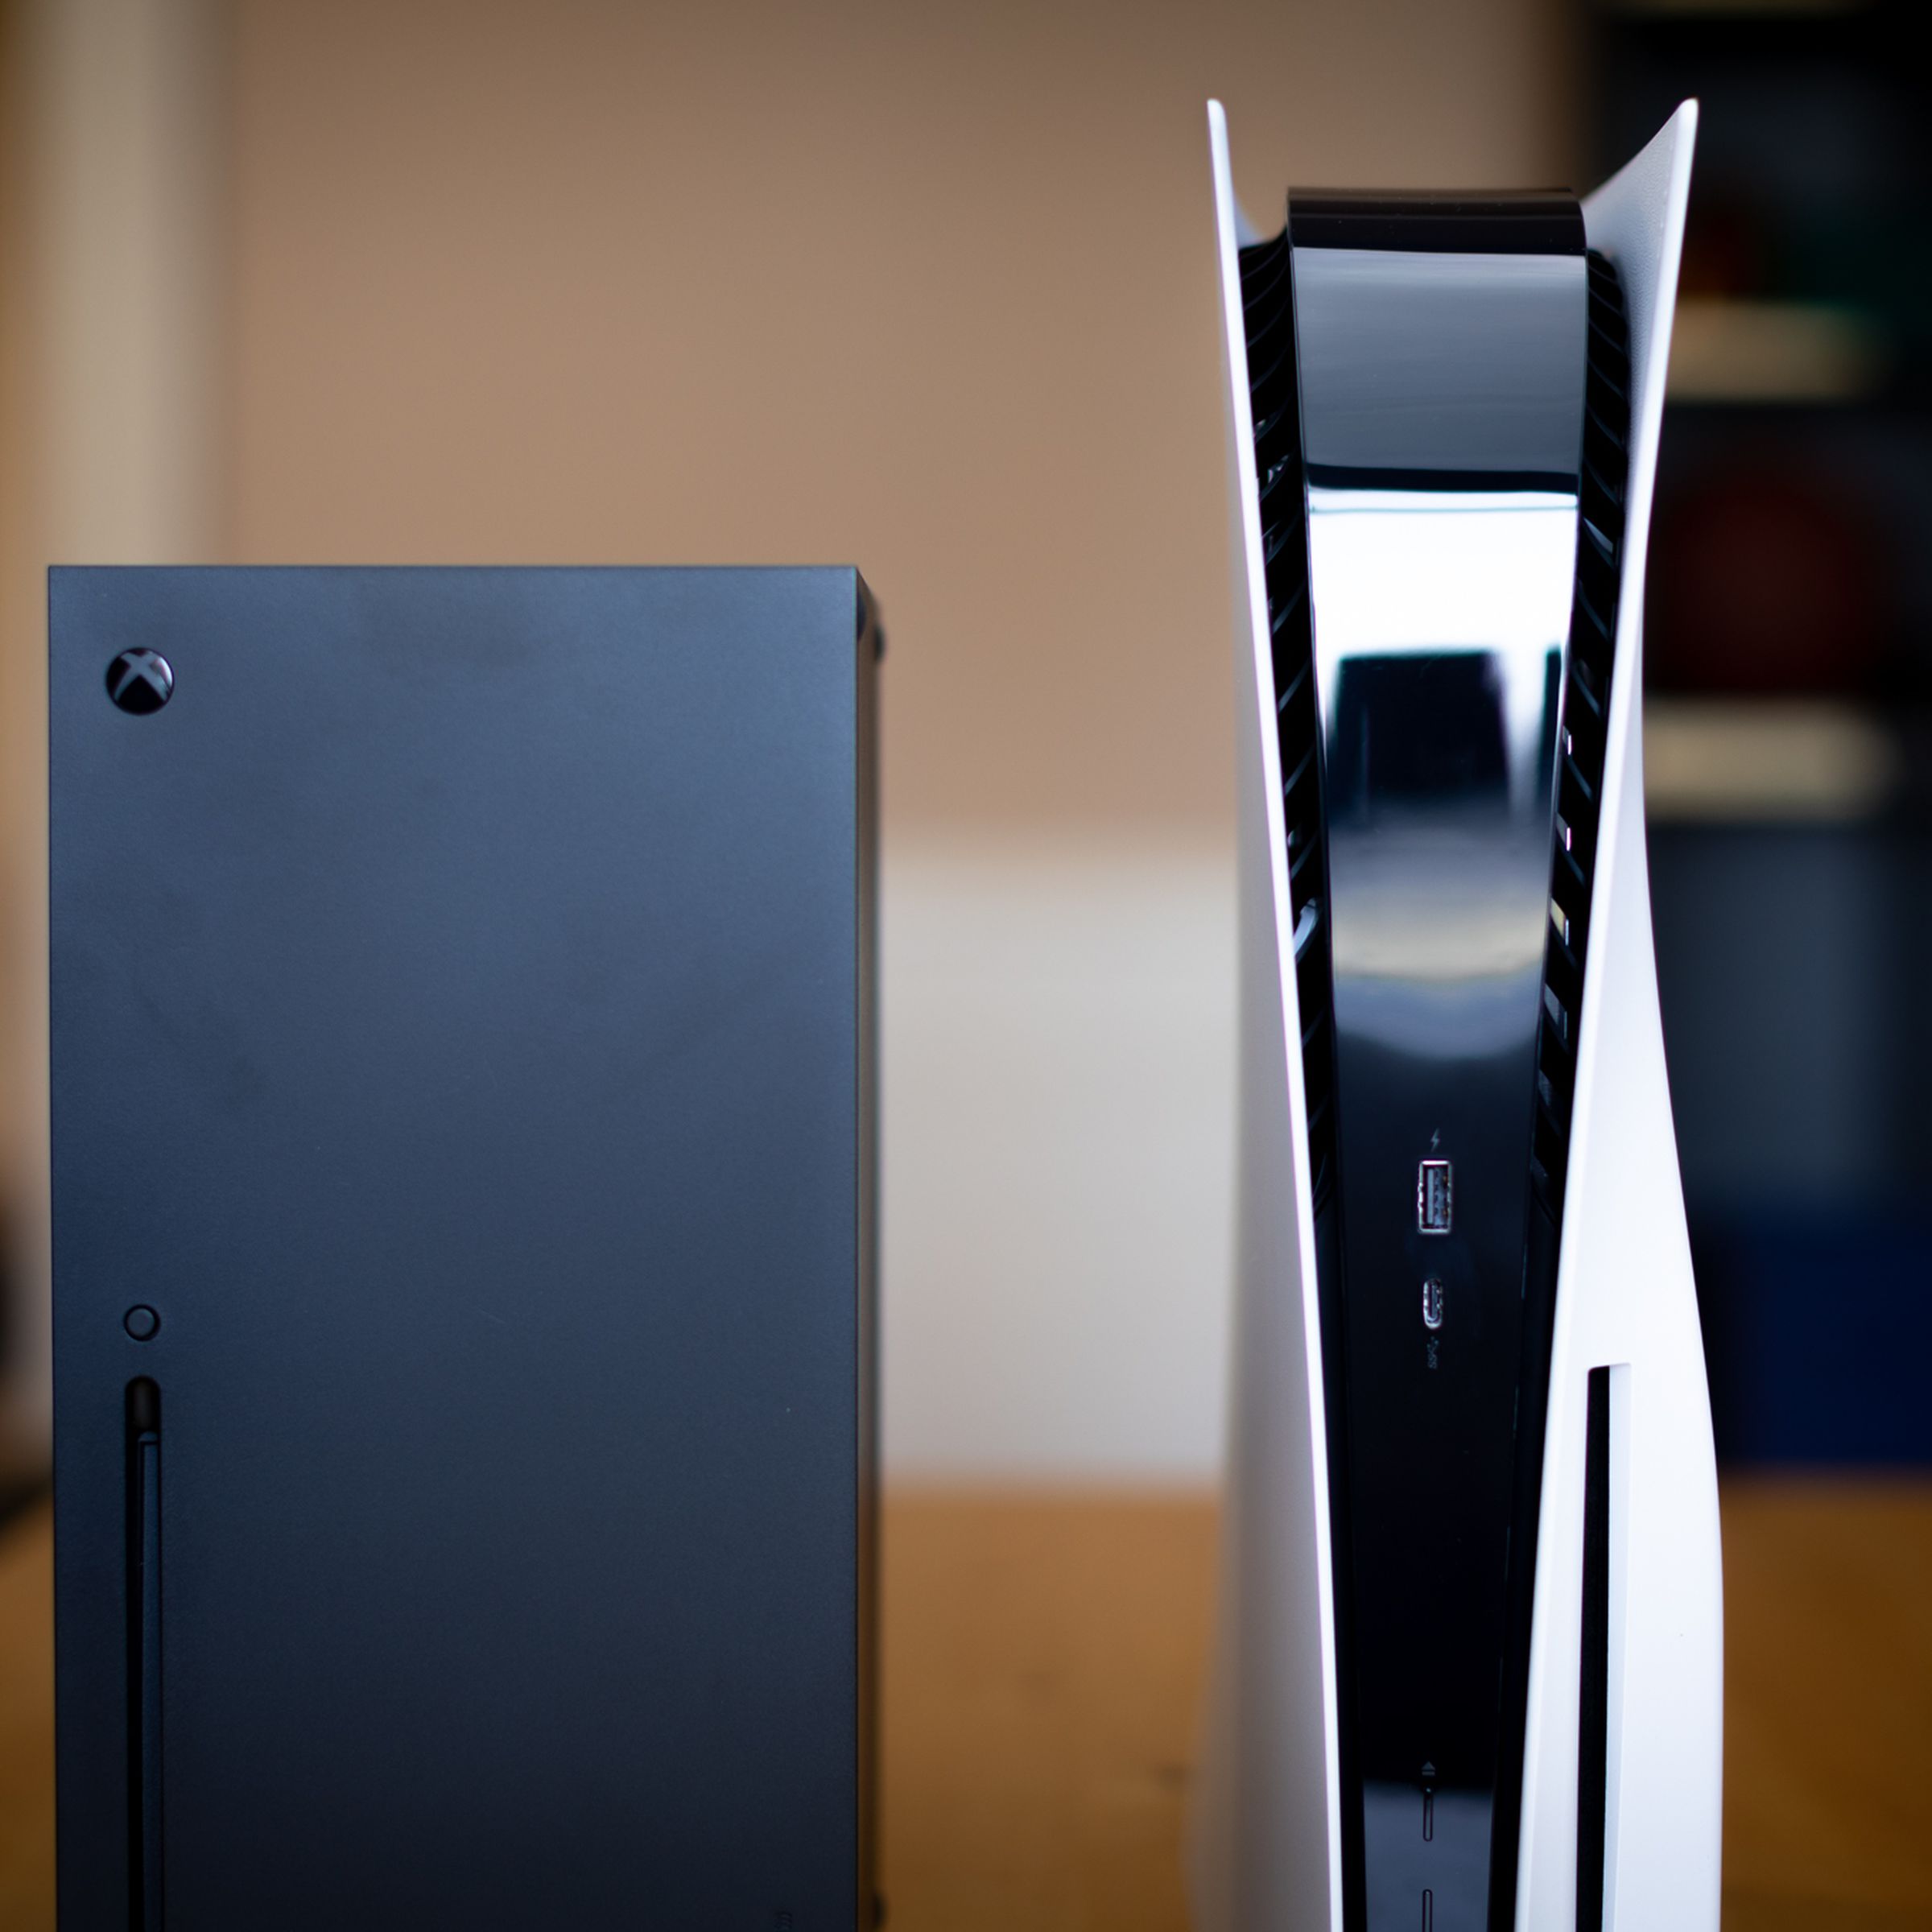 The Xbox Series X and PlayStation 5 standing side-by-side on a. table.